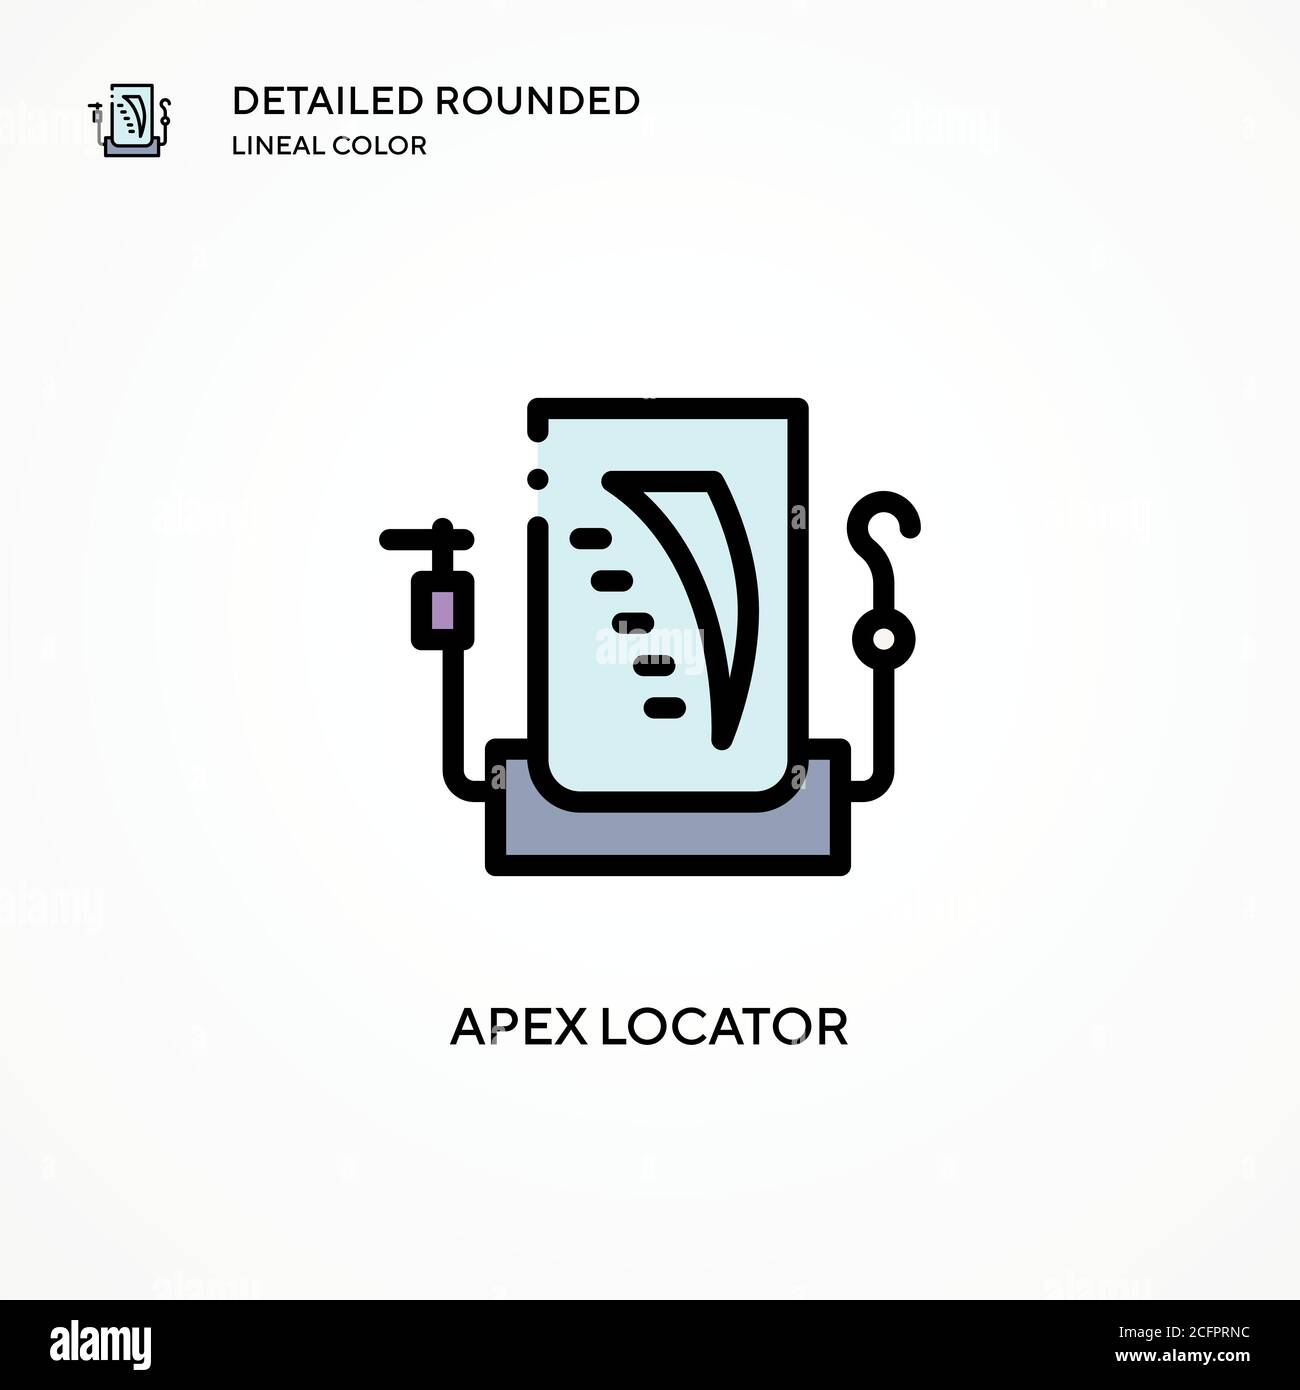 Apex locator vector icon. Modern vector illustration concepts. Easy to edit and customize. Stock Vector